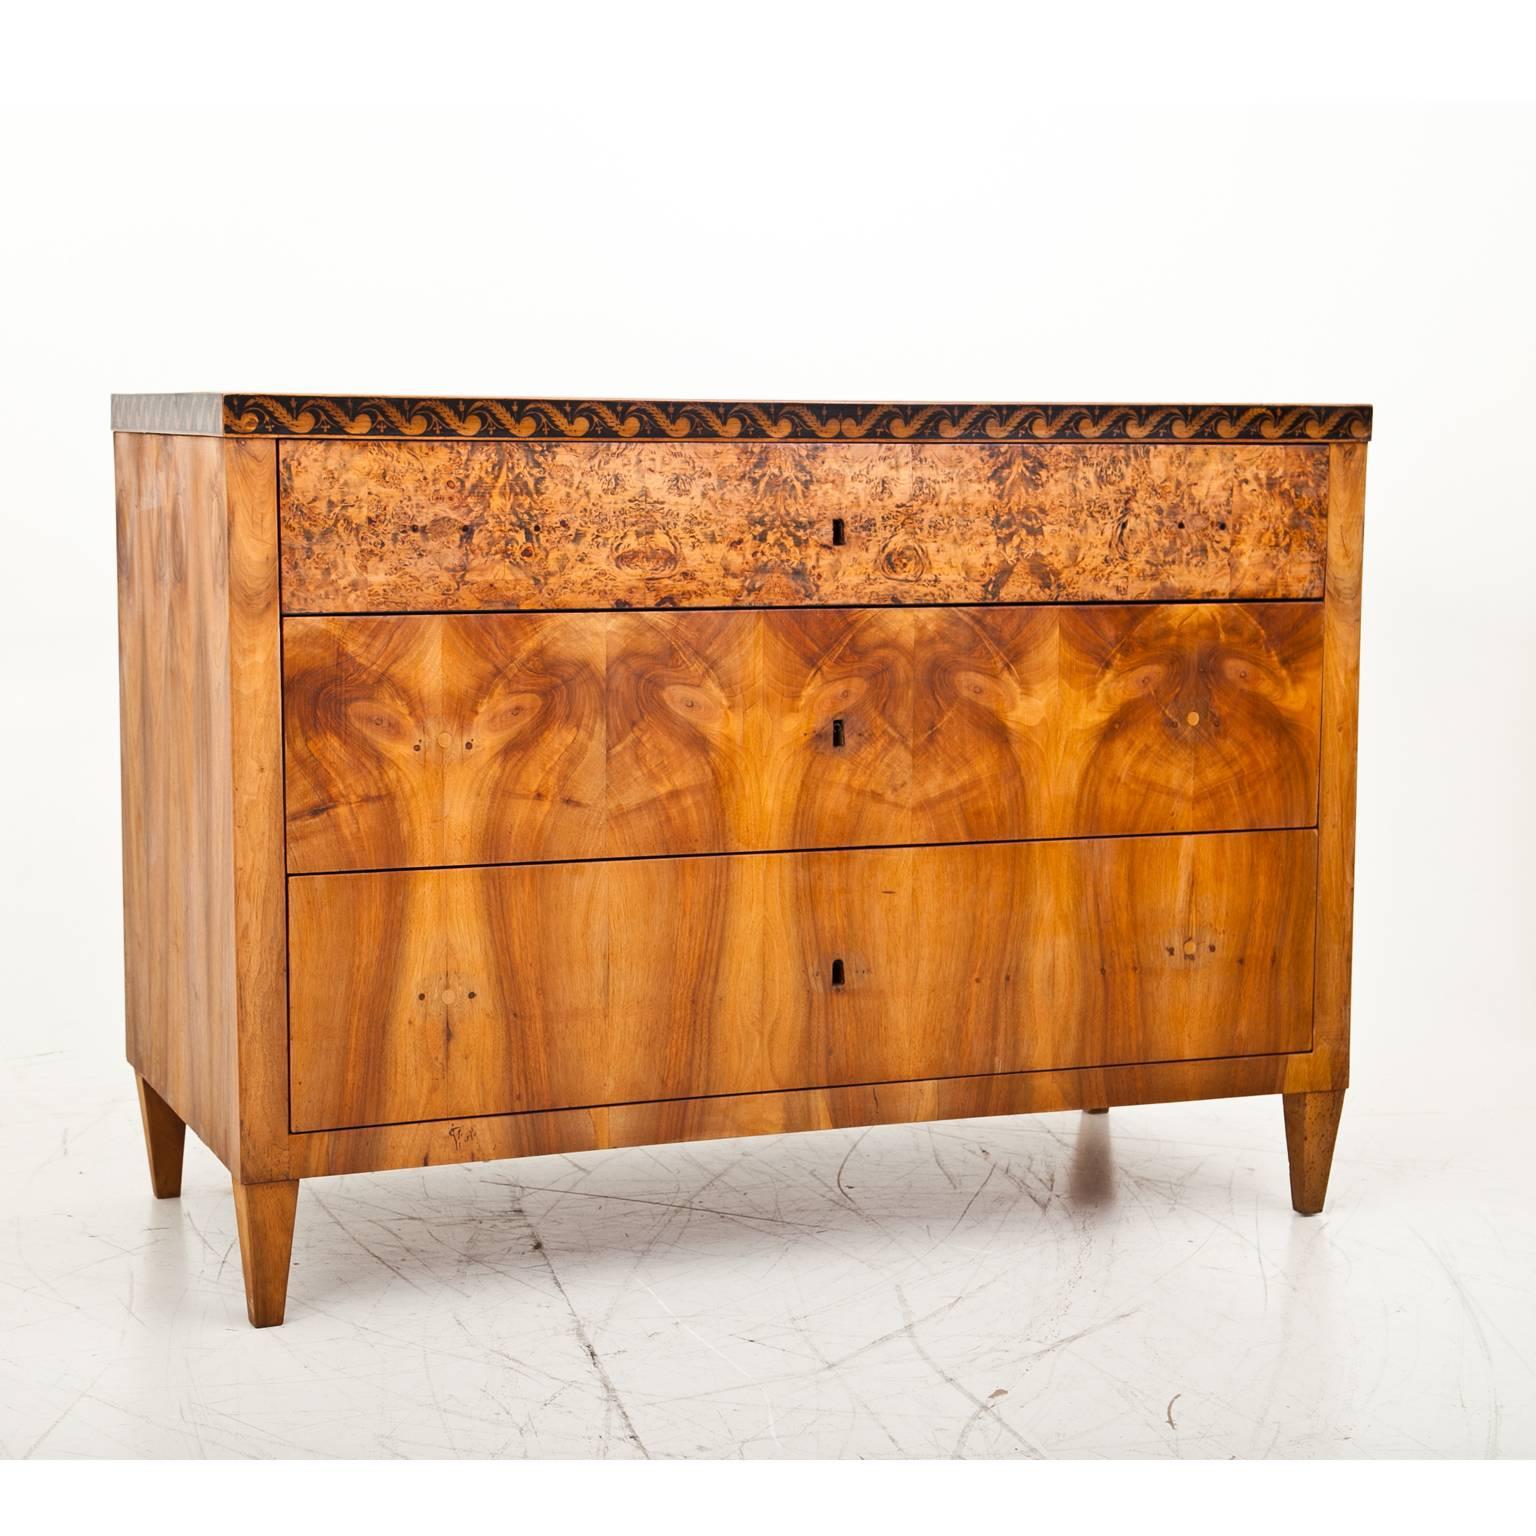 Early 19th Century Biedermeier Chest of Drawers, Probably South German, 1820s